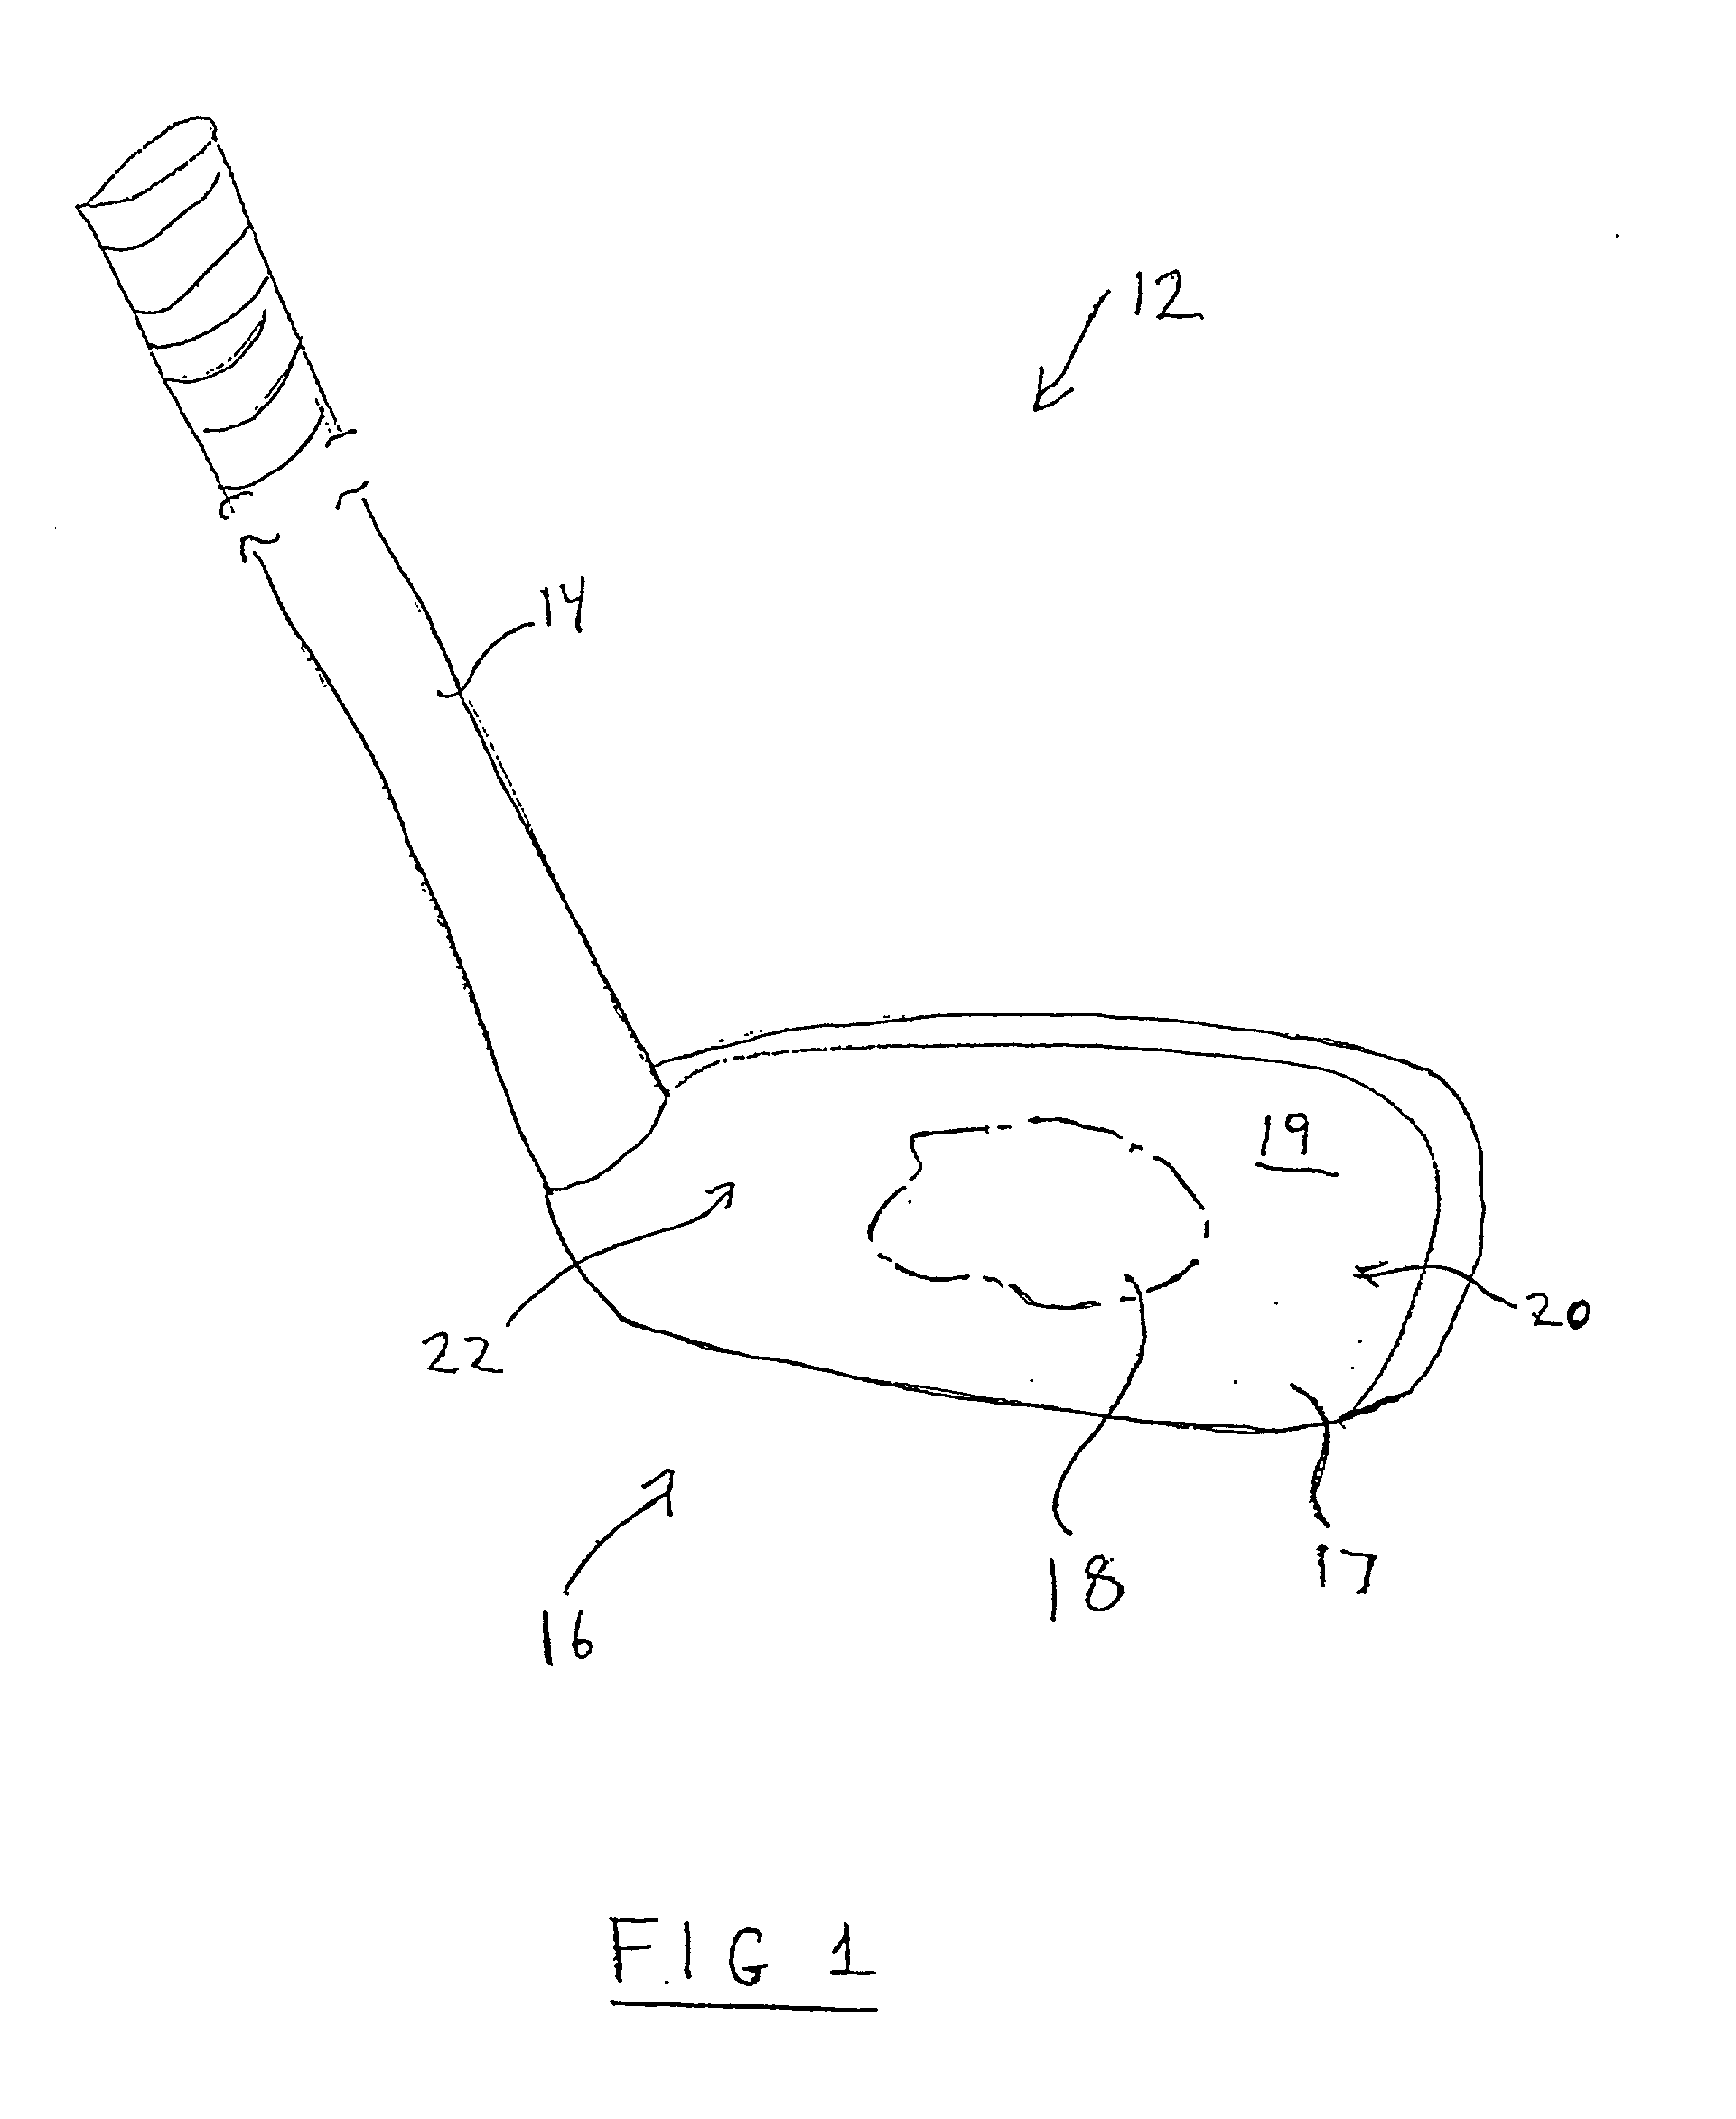 Method and apparatus for increasing hitting efficacy in a sporting implement